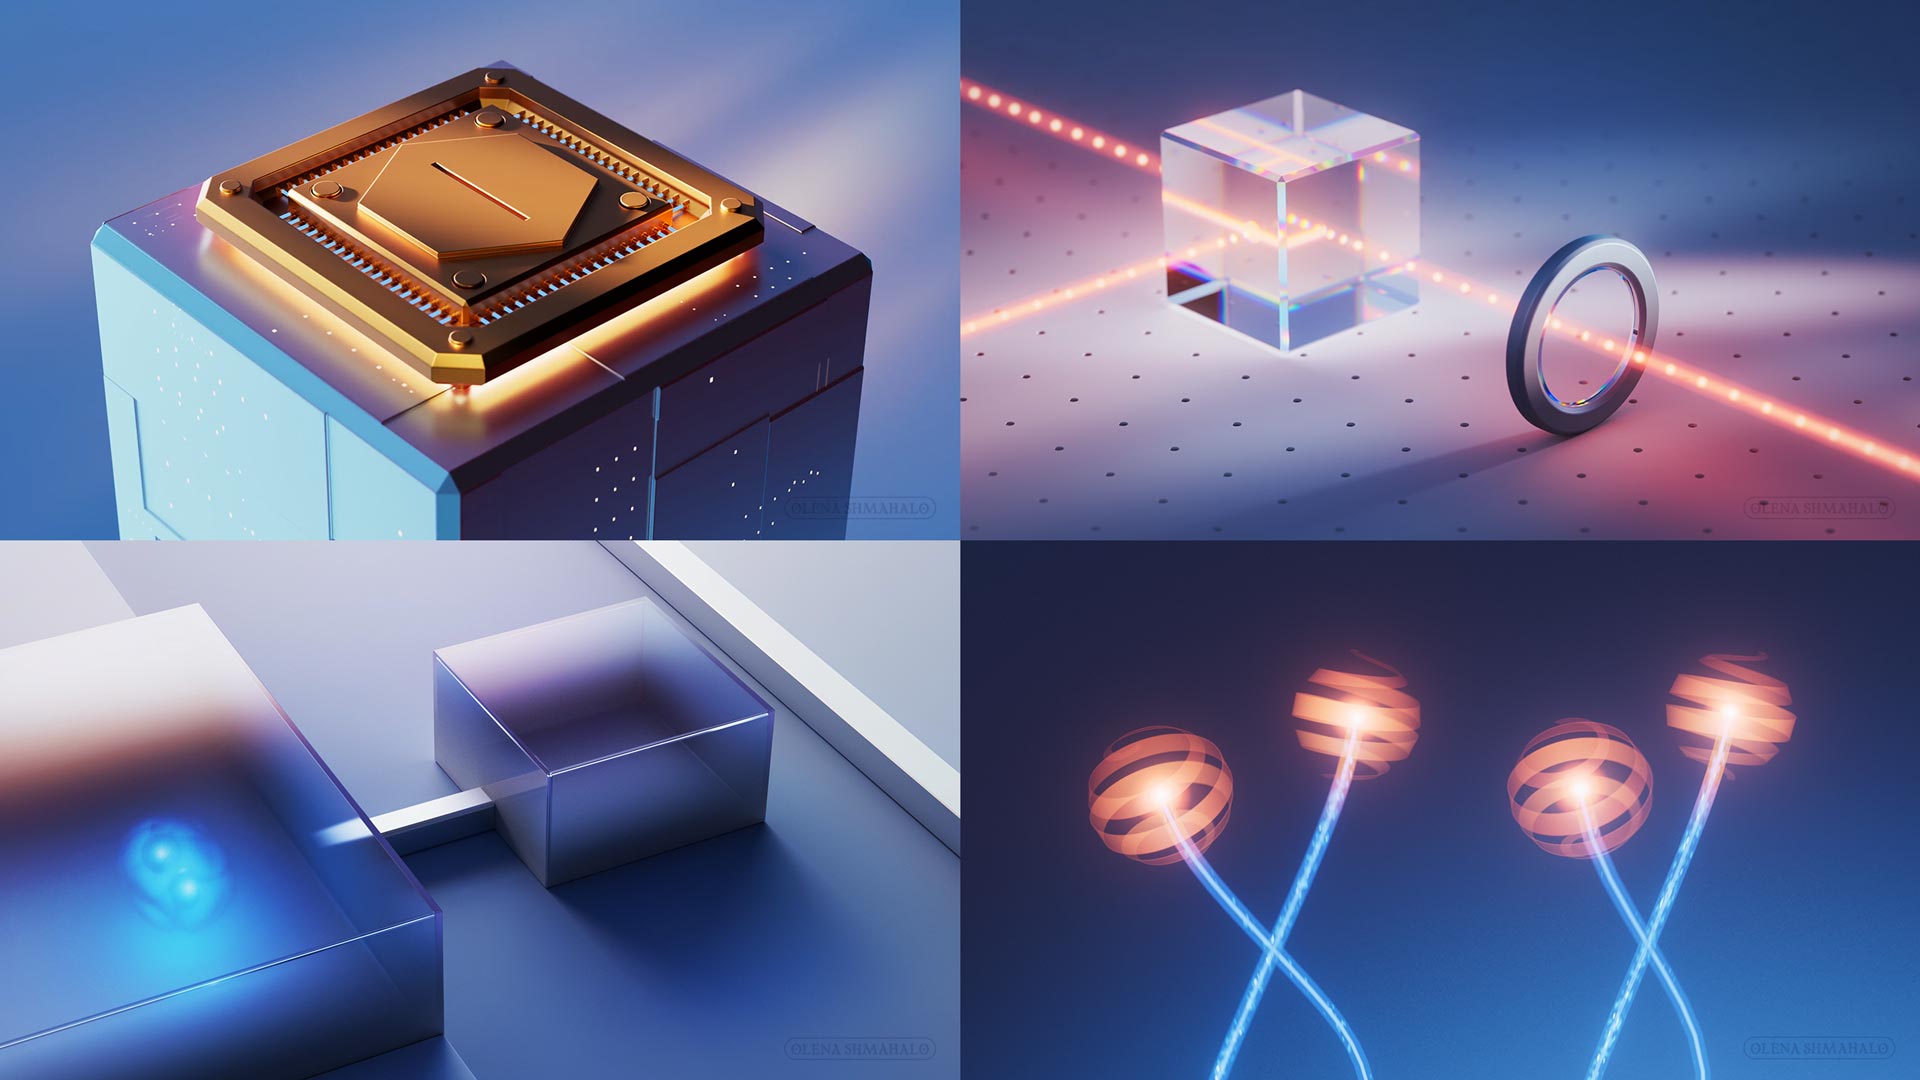 A quad of stylized 3D science illustrations depicting quantum physical systems: a gold quantum computer chip, a particle beam traveling through a prism and polarizing filter, an electron pair in a superconducting device called a Josephson junction, and quasiparticles called anyons braiding around one another. Art by Olena Shmahalo for The Quantum Atlas / University of Maryland.